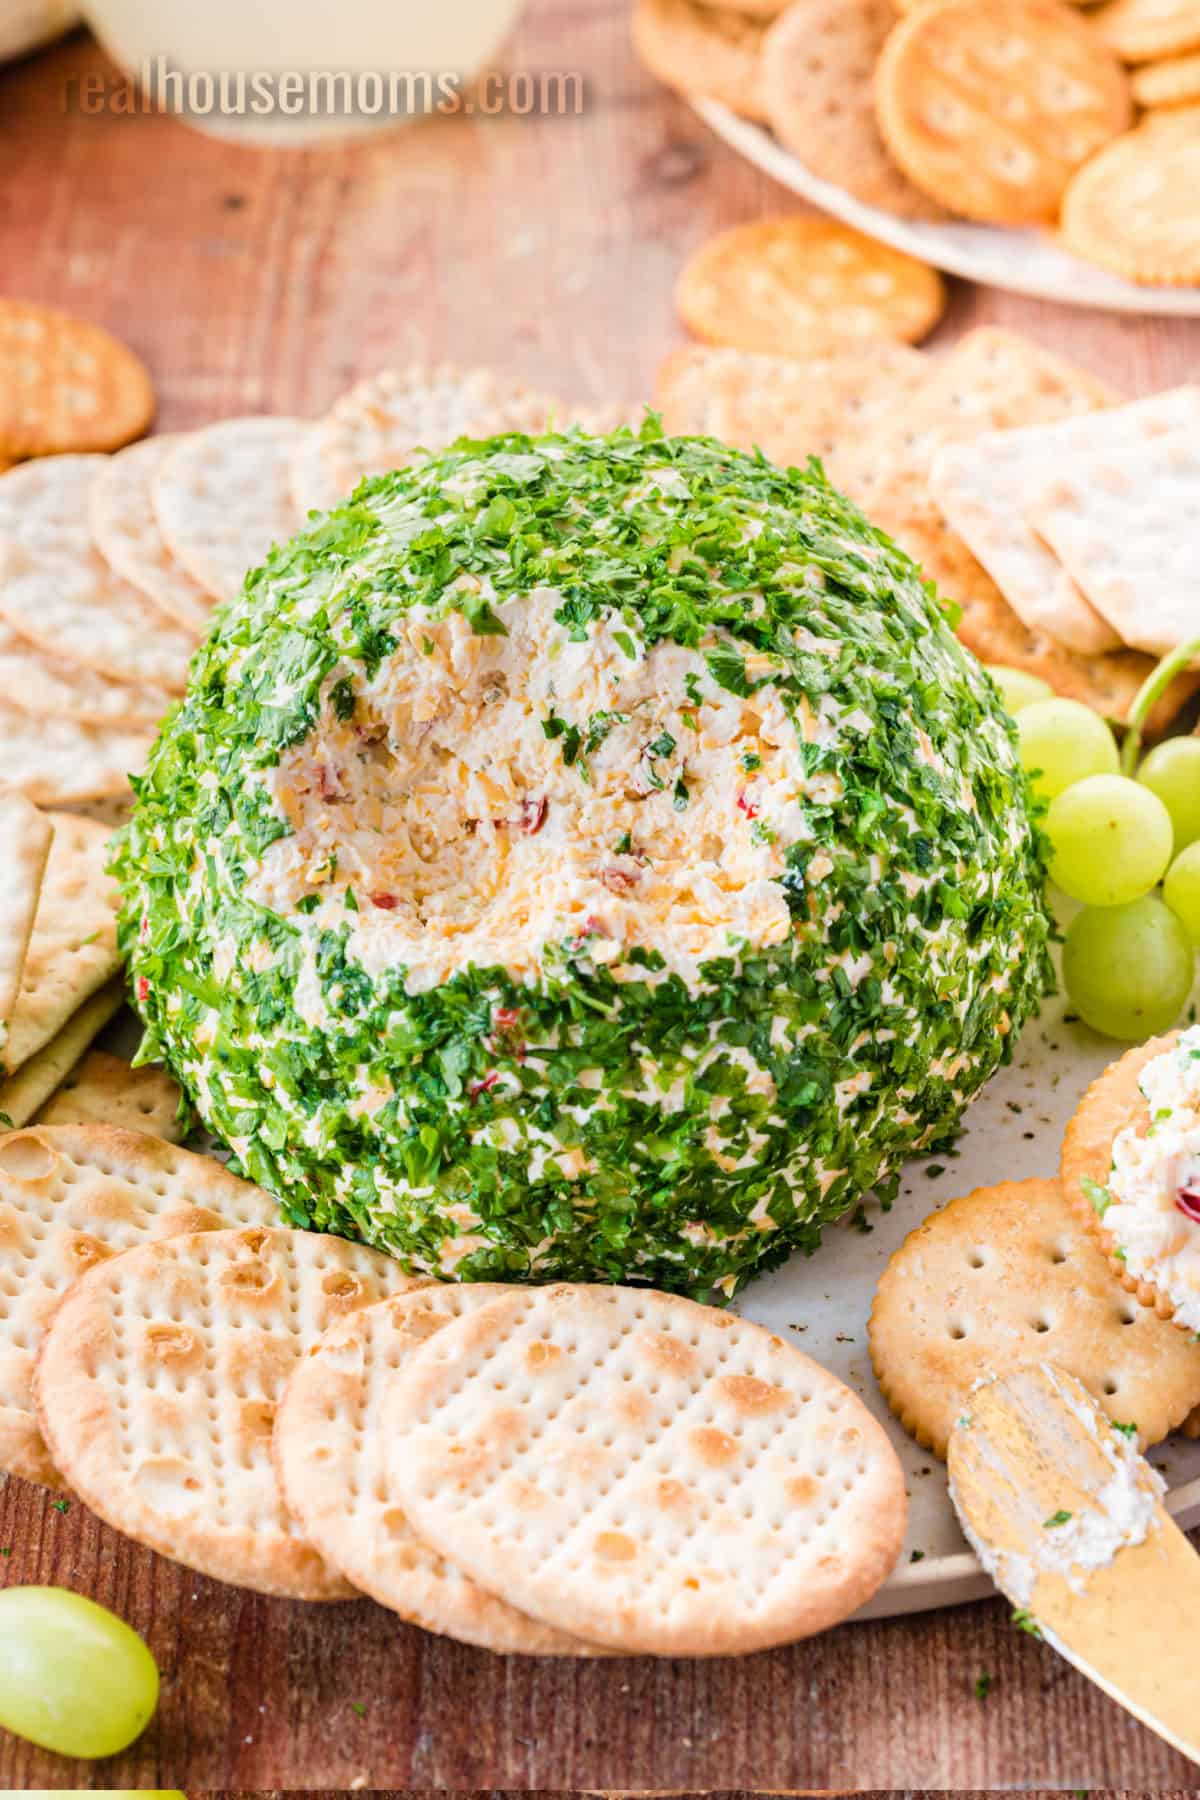 Chocolate Chip Cheese Ball - THIS IS NOT DIET FOOD